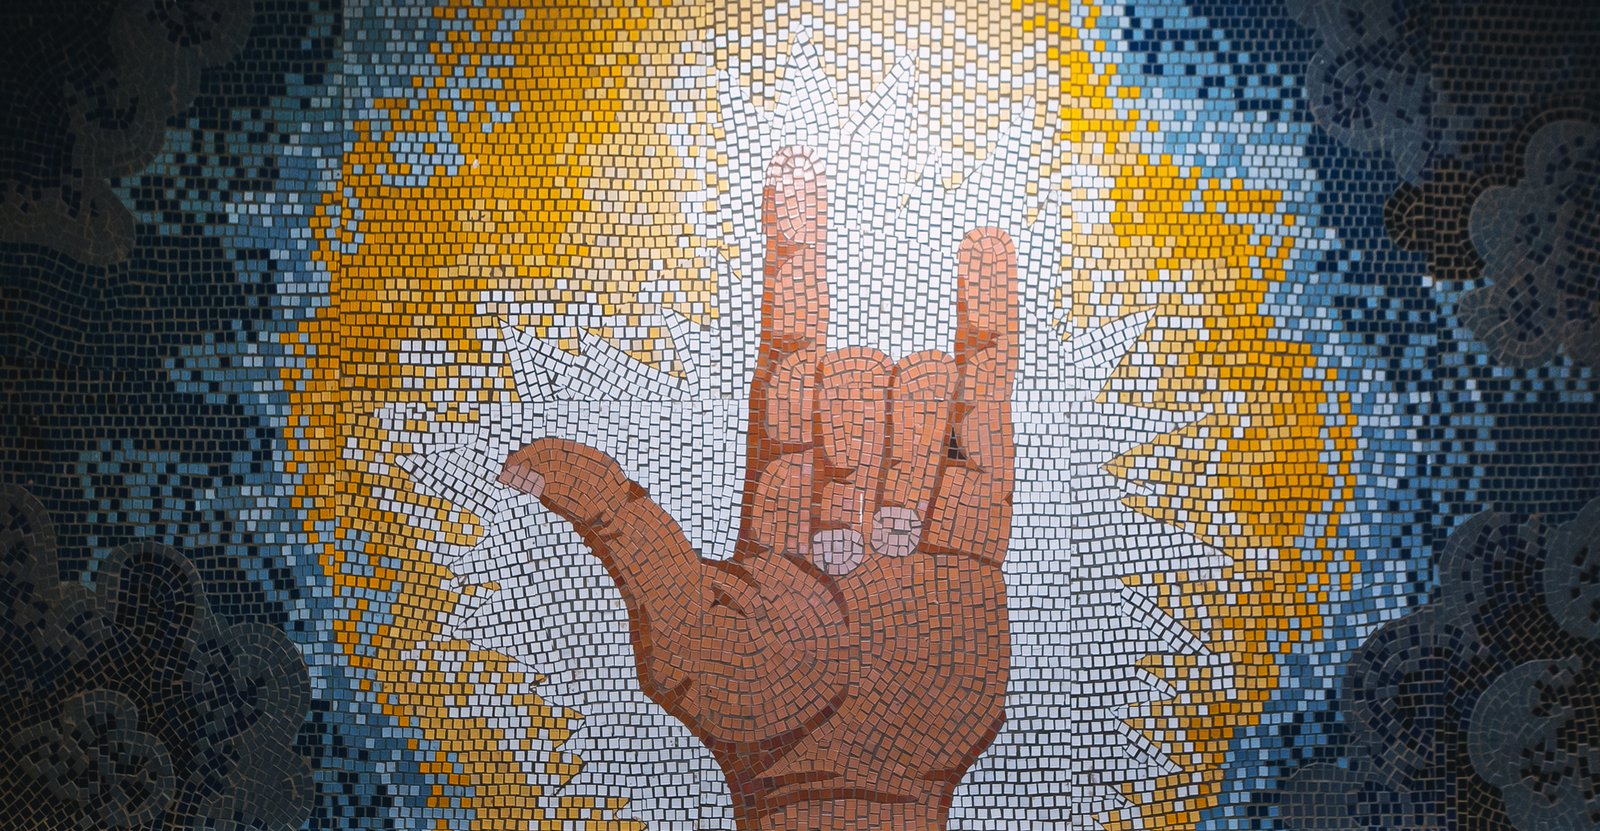 The mosaic depicts the sign "I love you" in International Sign&mdash;a contact variety of sign language used among deaf communities from different countries. Courtesy Moscow public municipal Kurchatov School, S.Y. Krivovyaz wing for hearing-impaired children №101. Photo: Anton Donikov